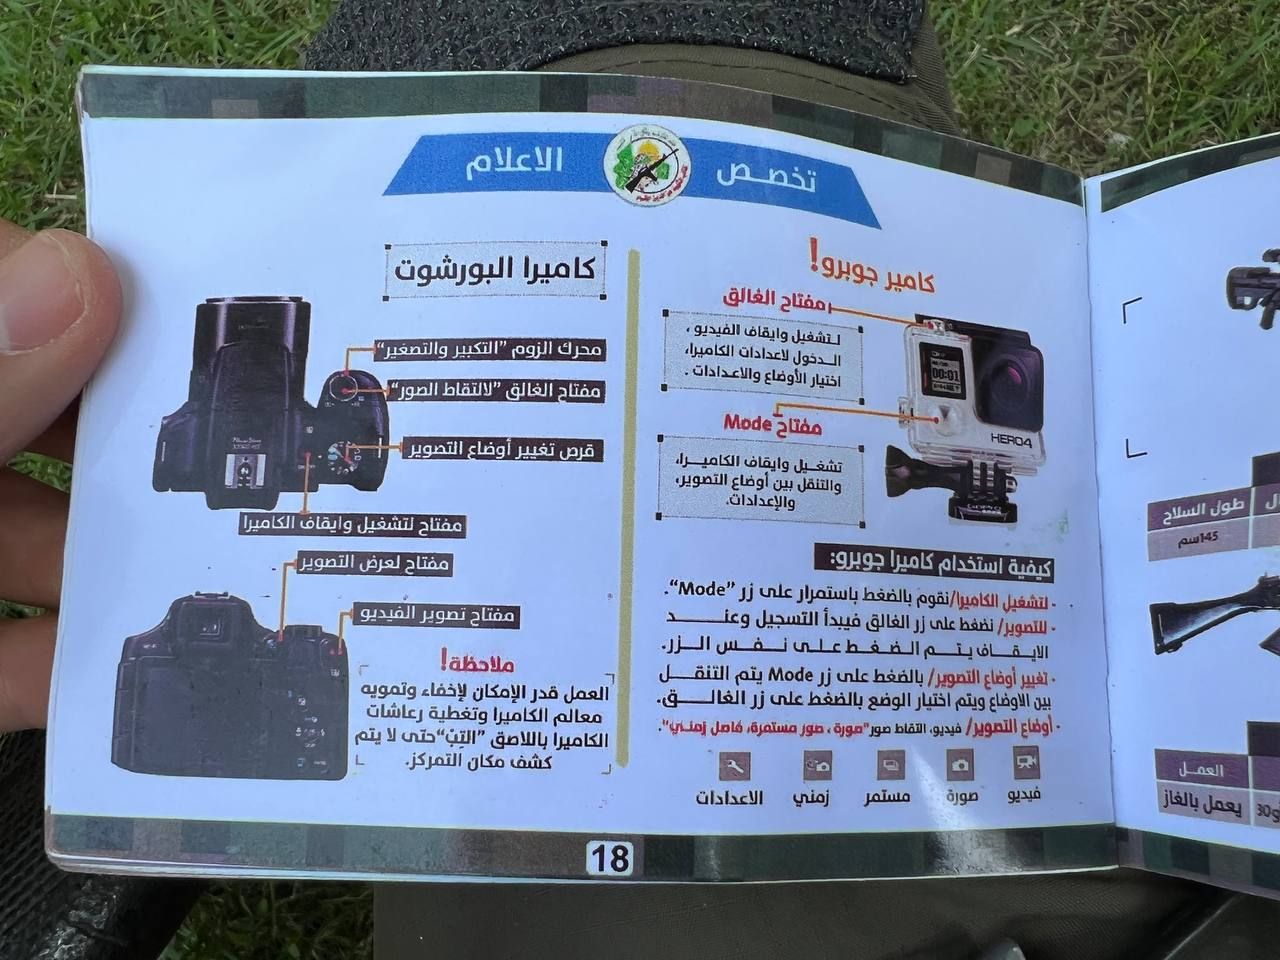 A photo of a Hamas instruction booklet recovered by the Israel Defense Forces includes instructions for a GoPro Hero4 camera.